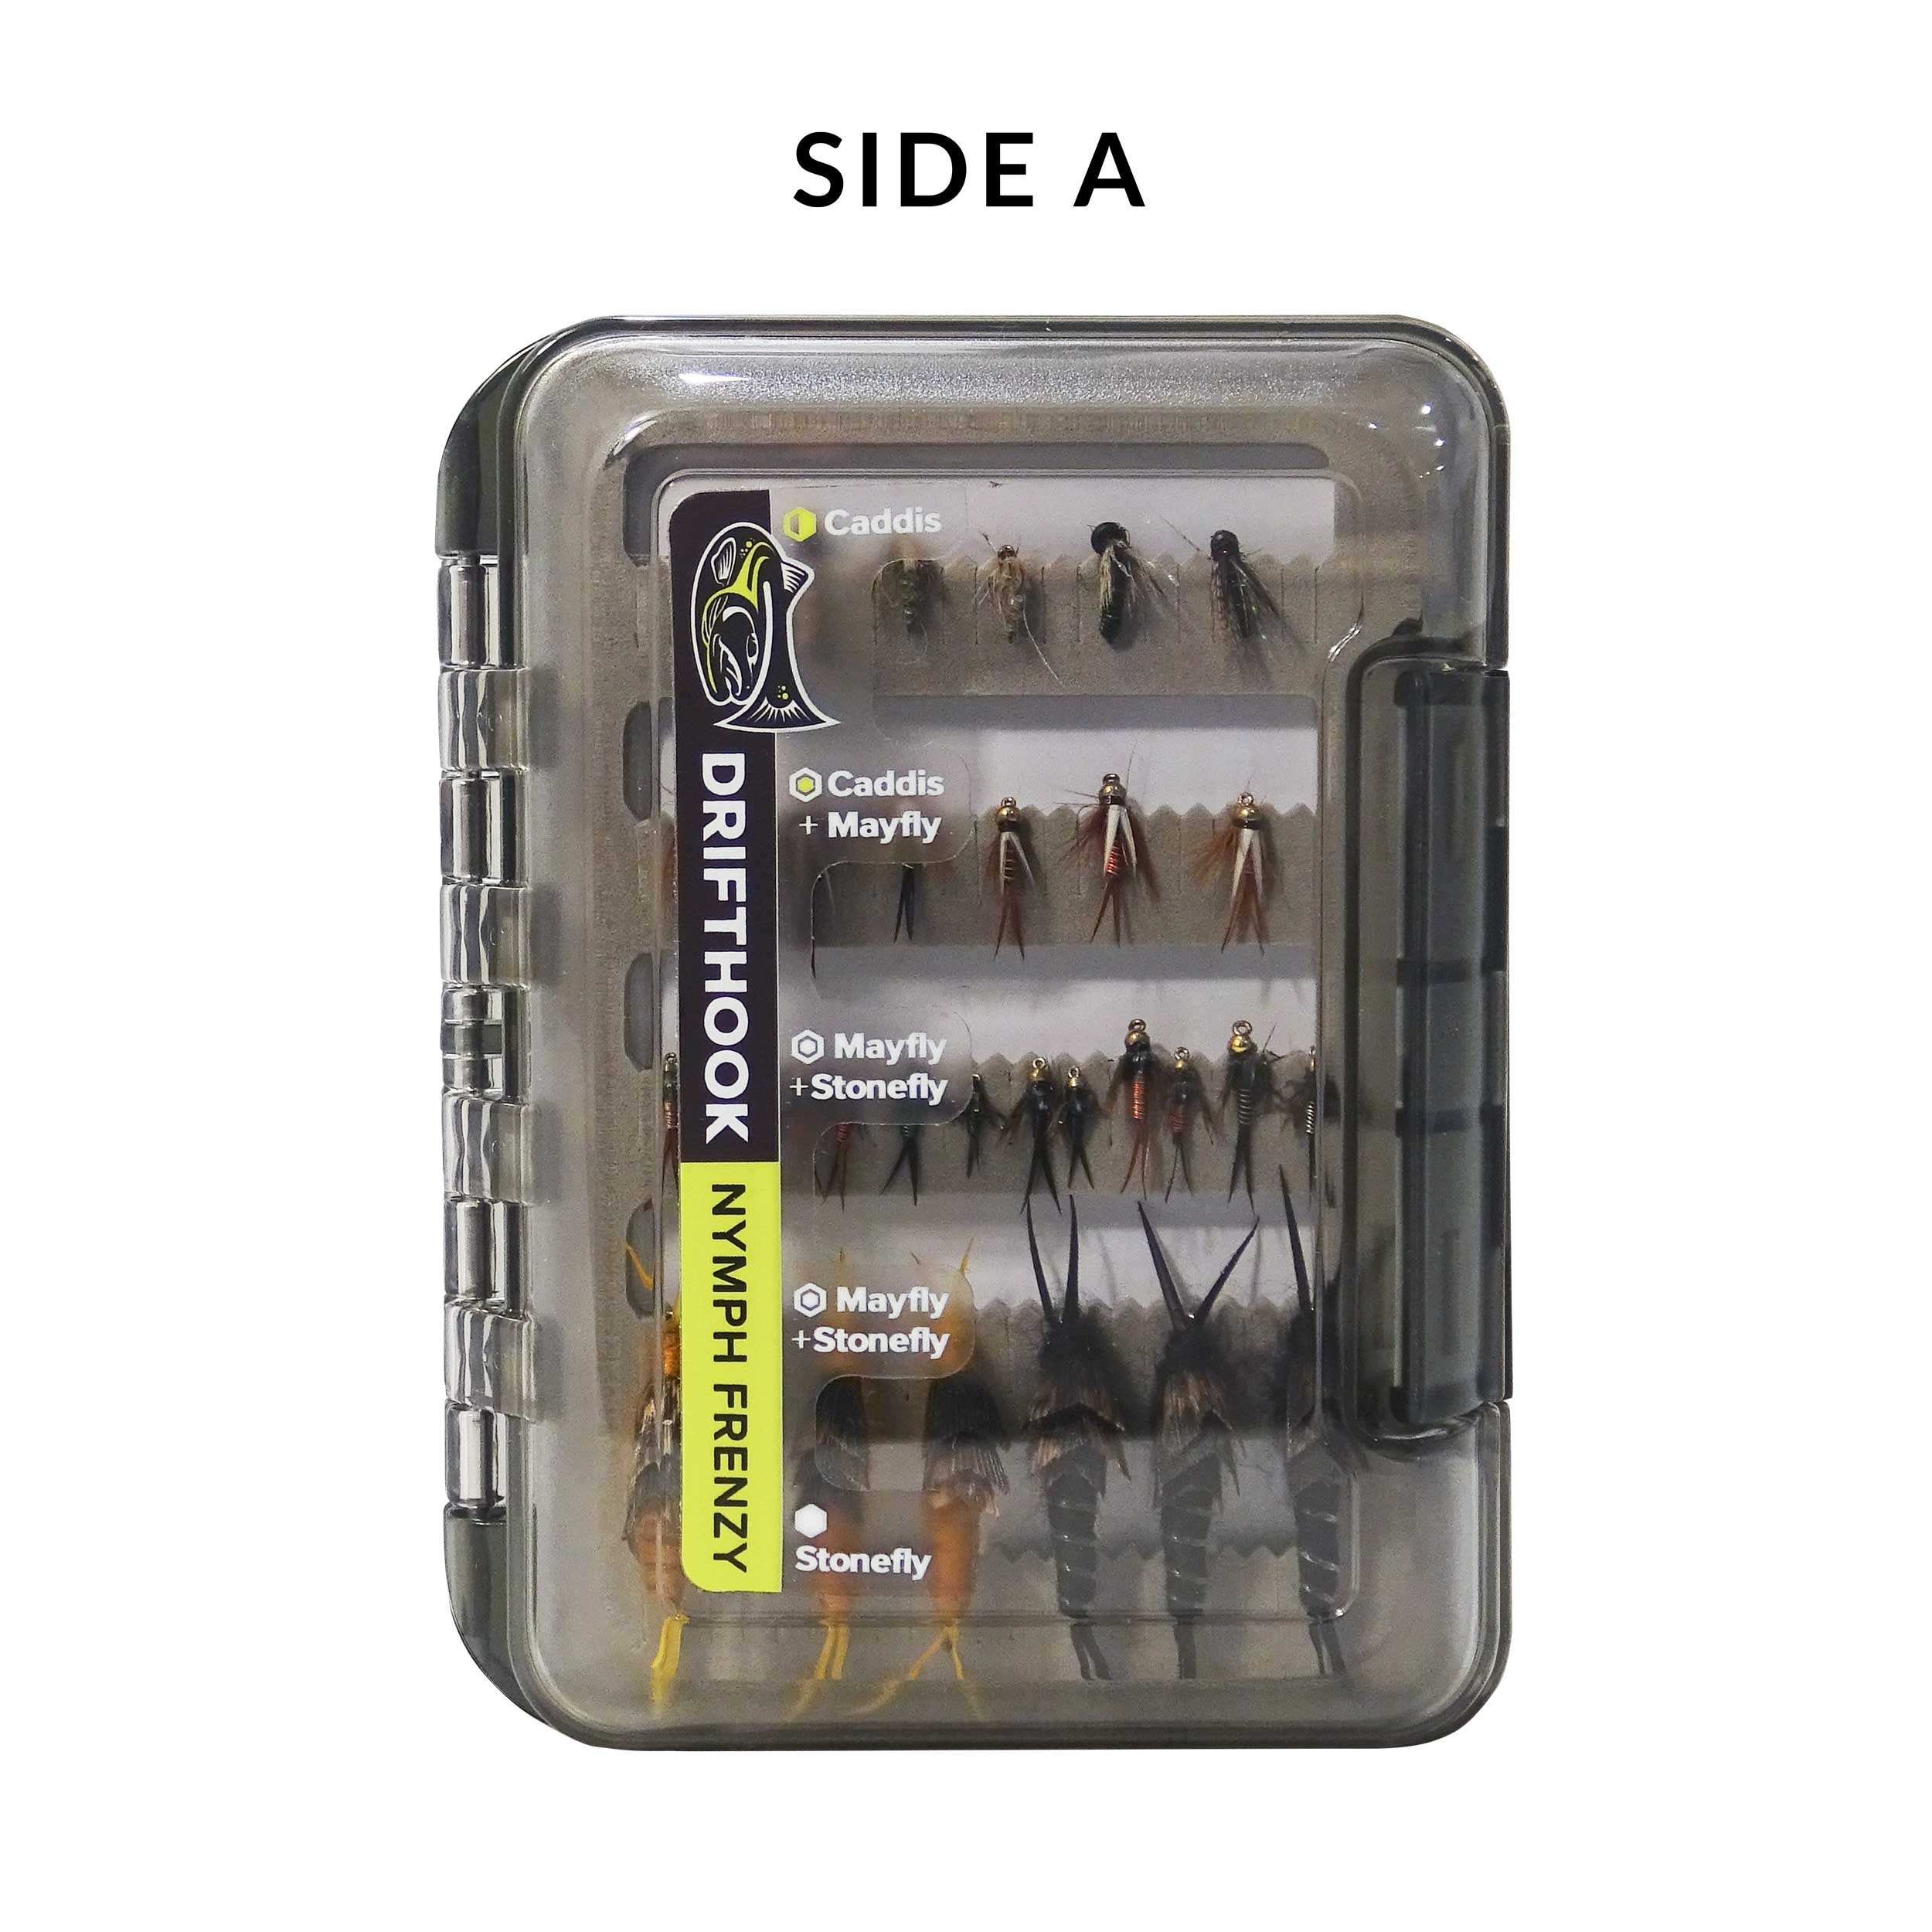 Nymph Frenzy Fly Fishing Kit | 60 Nymph Fly Fishing Flies with Box & Guides - Drifthook